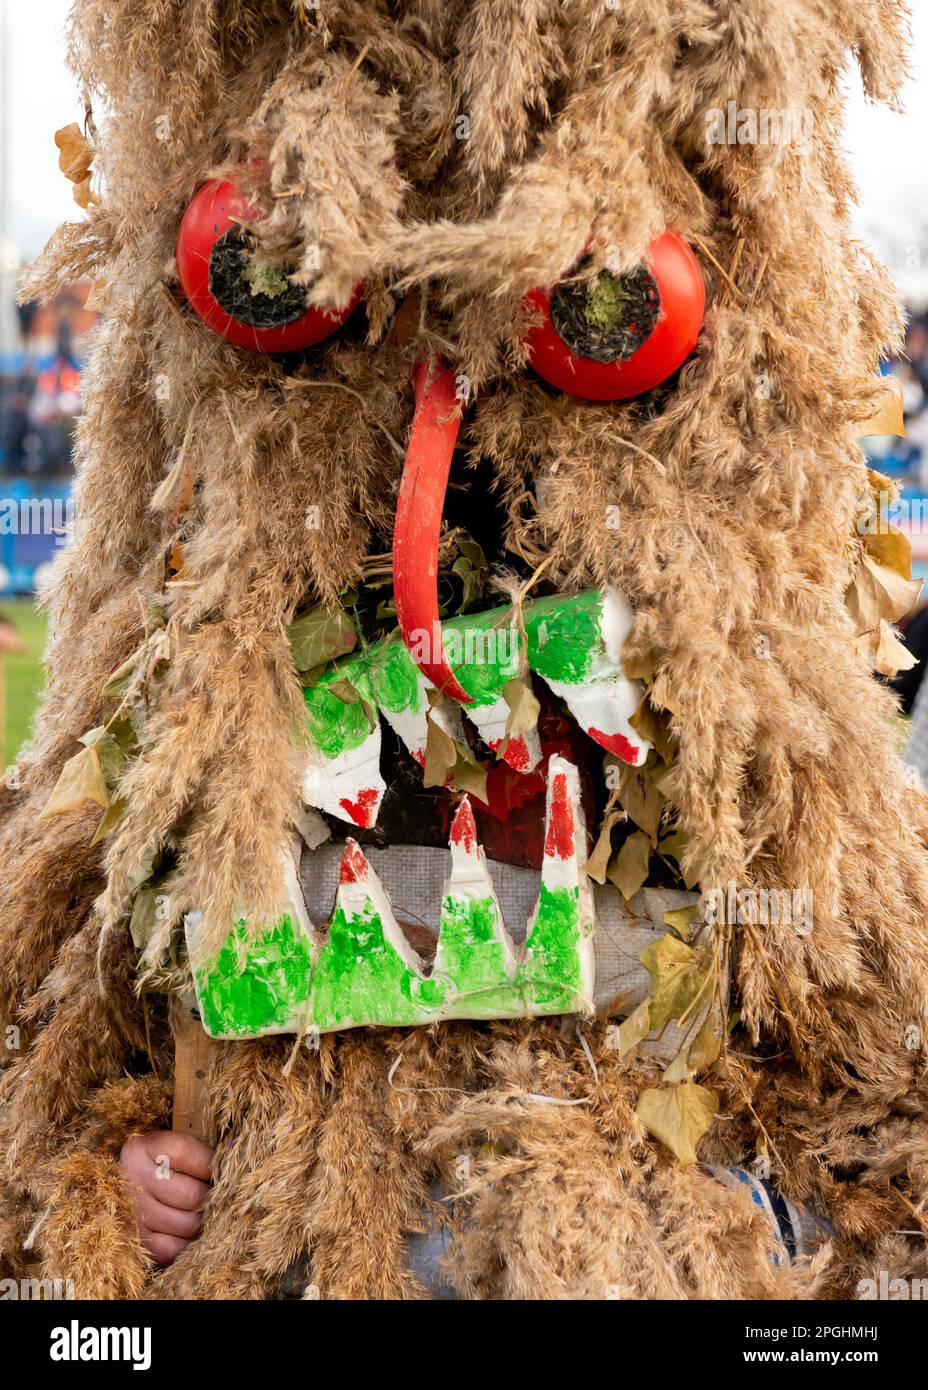 Kukeri participant with distinctive weird large mask from Brejani village at the annual Simitlia Kukeri winter festival in Simitli, Bulgaria Stock Photo